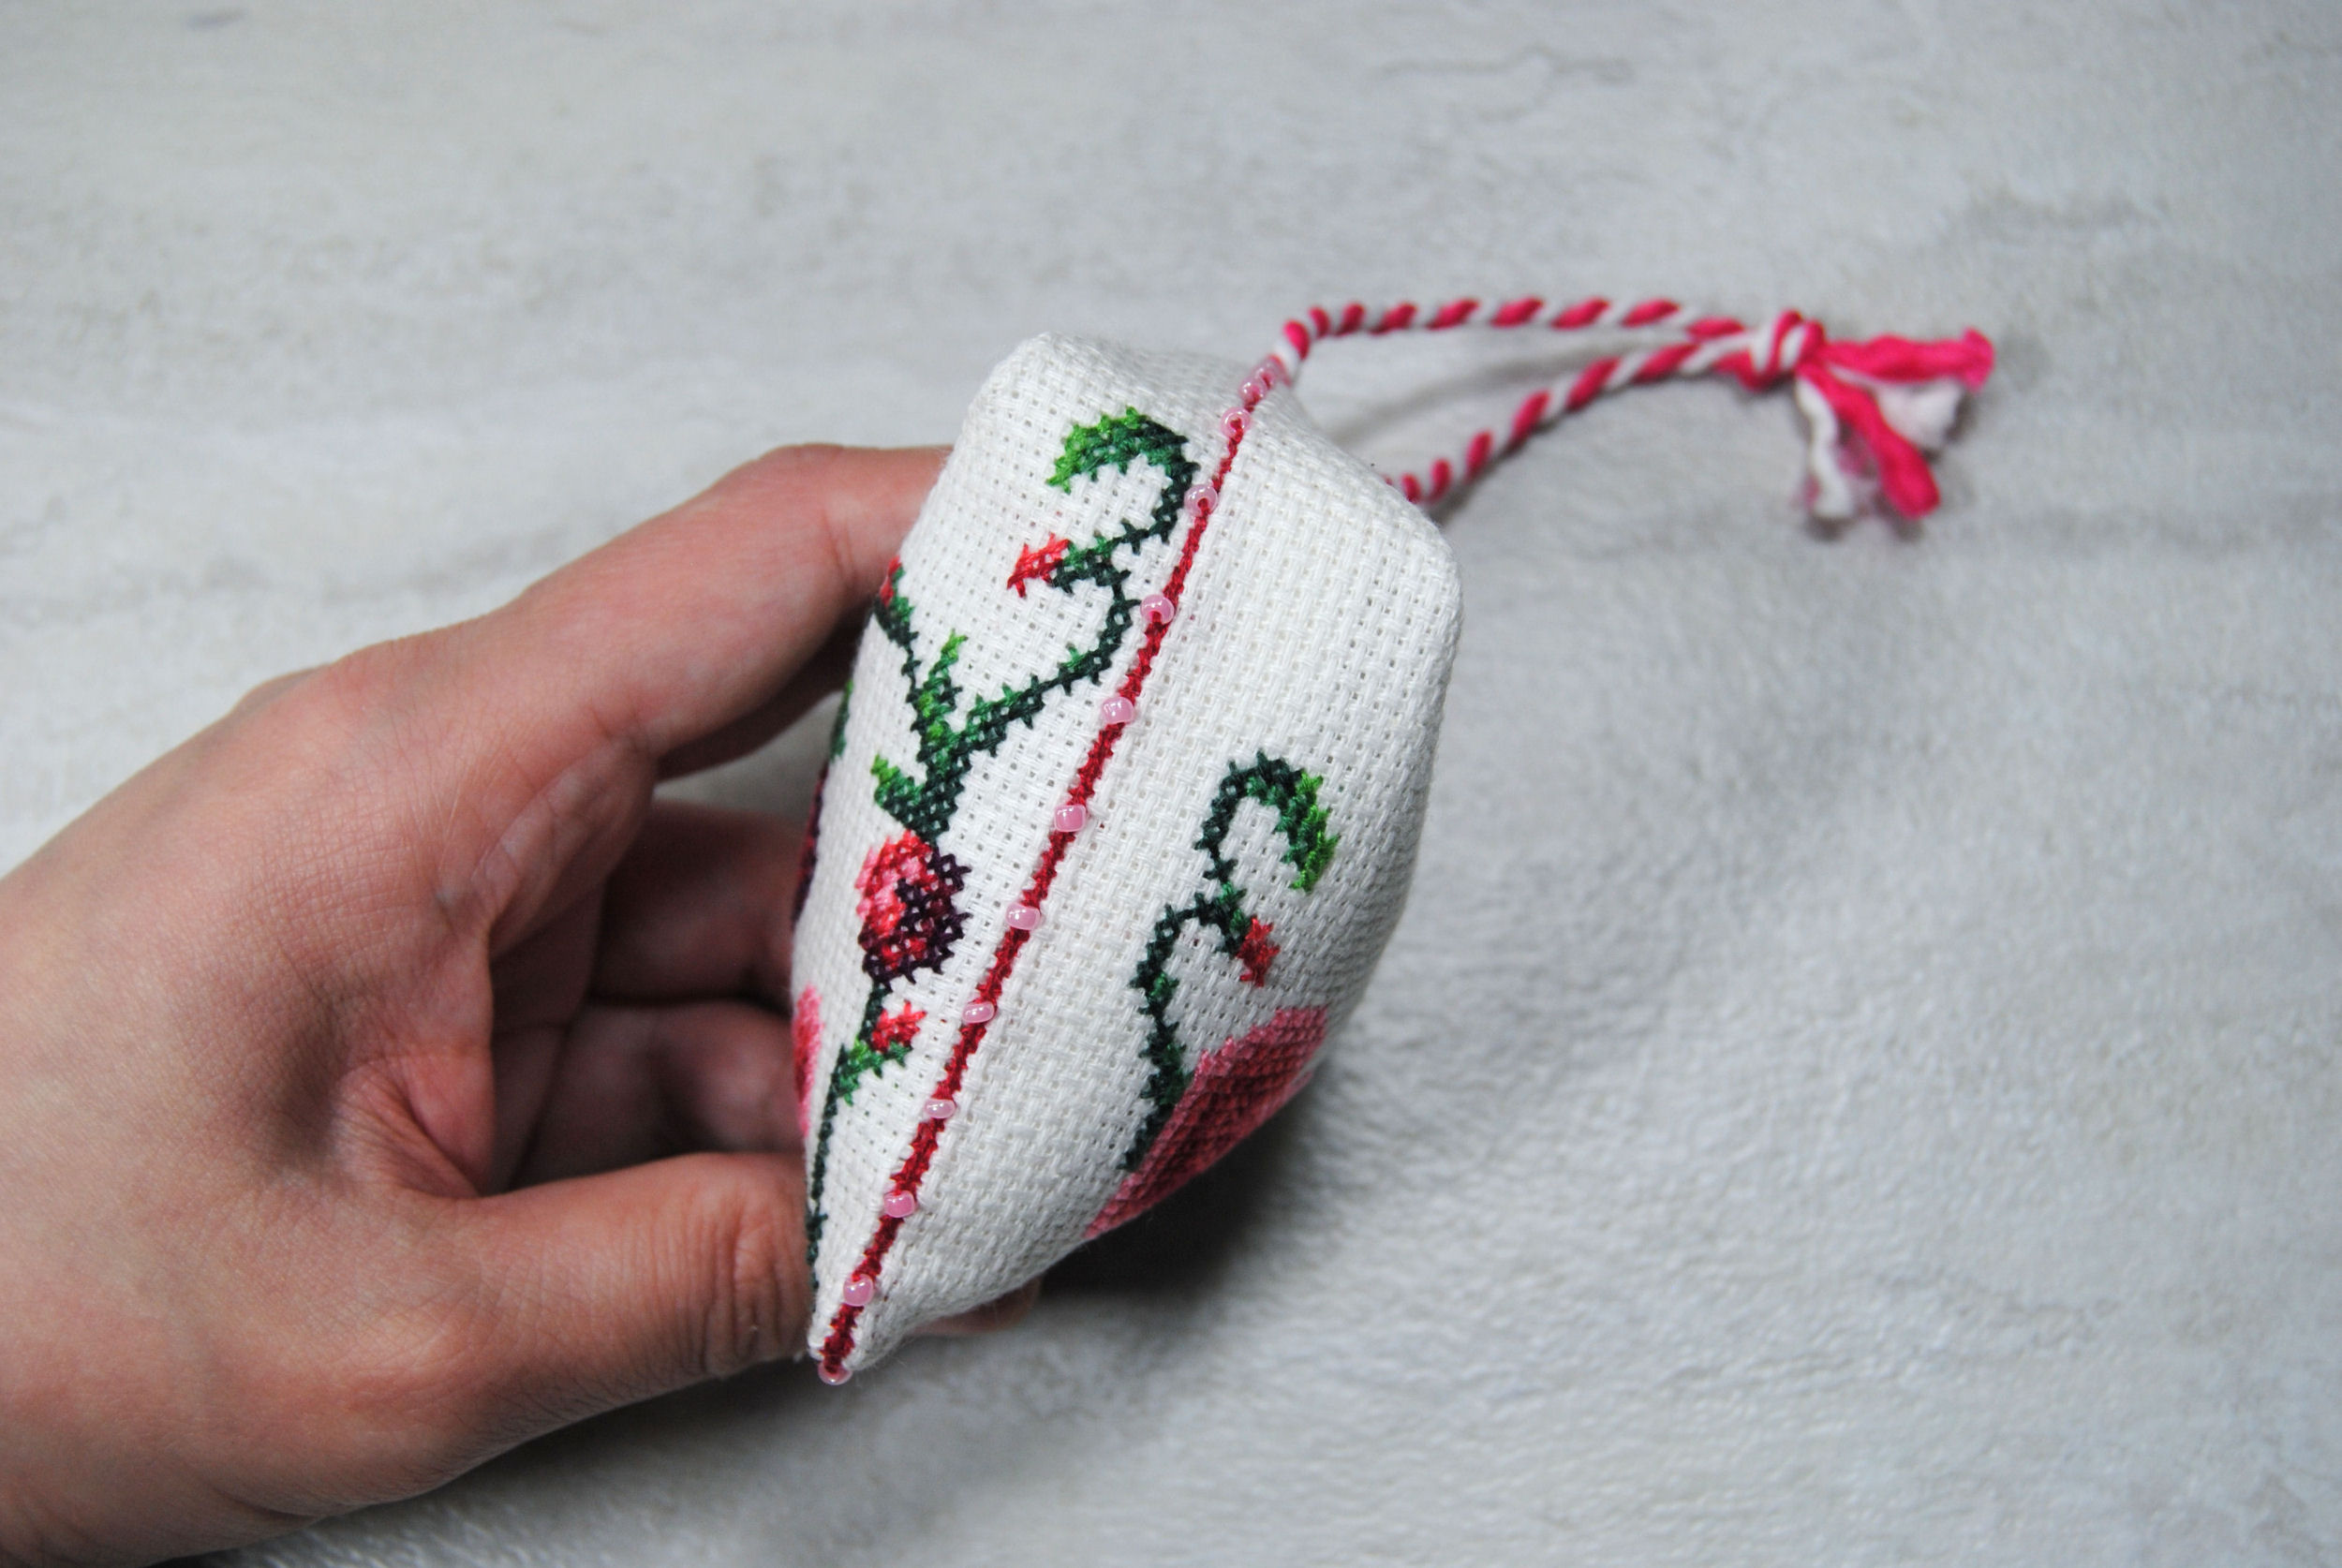 How to Make Cross Stitch Ornaments, Cushions and Wall Hangings -  Caterpillar Cross Stitch